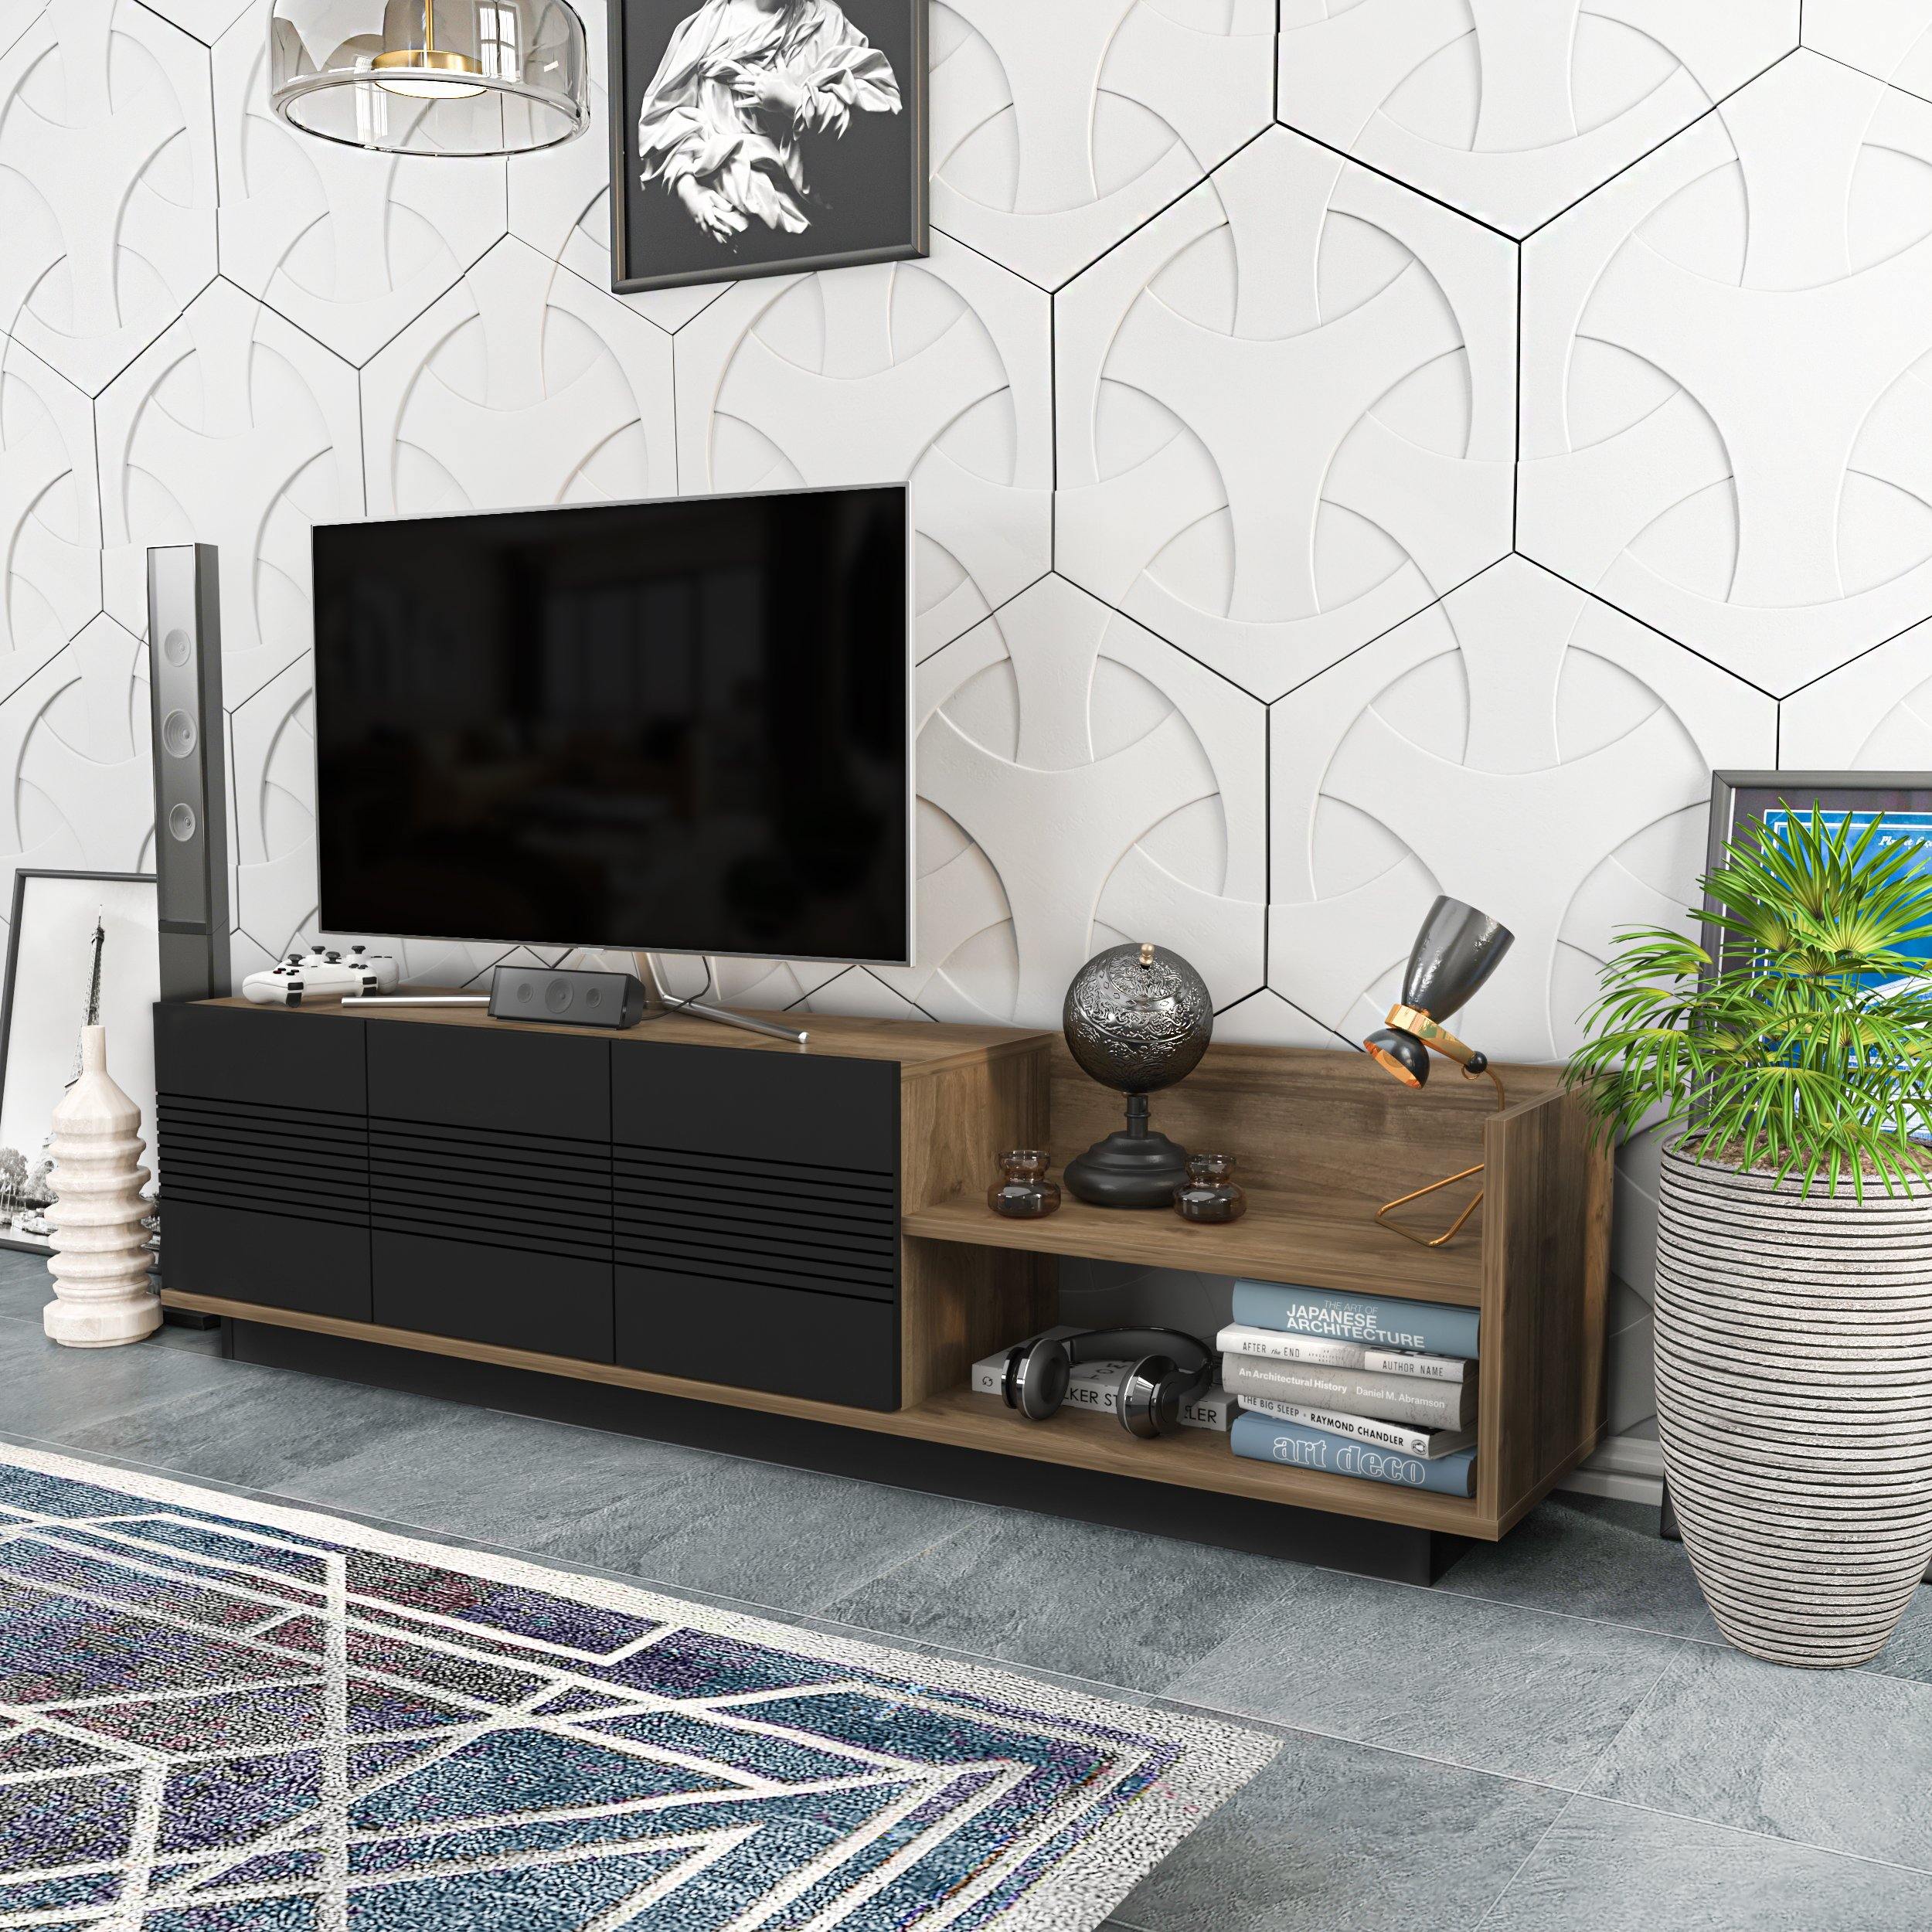 Viano TV Stand and Media Console with A Cabinet and Shelves for TVs up to 47" - Decorotika